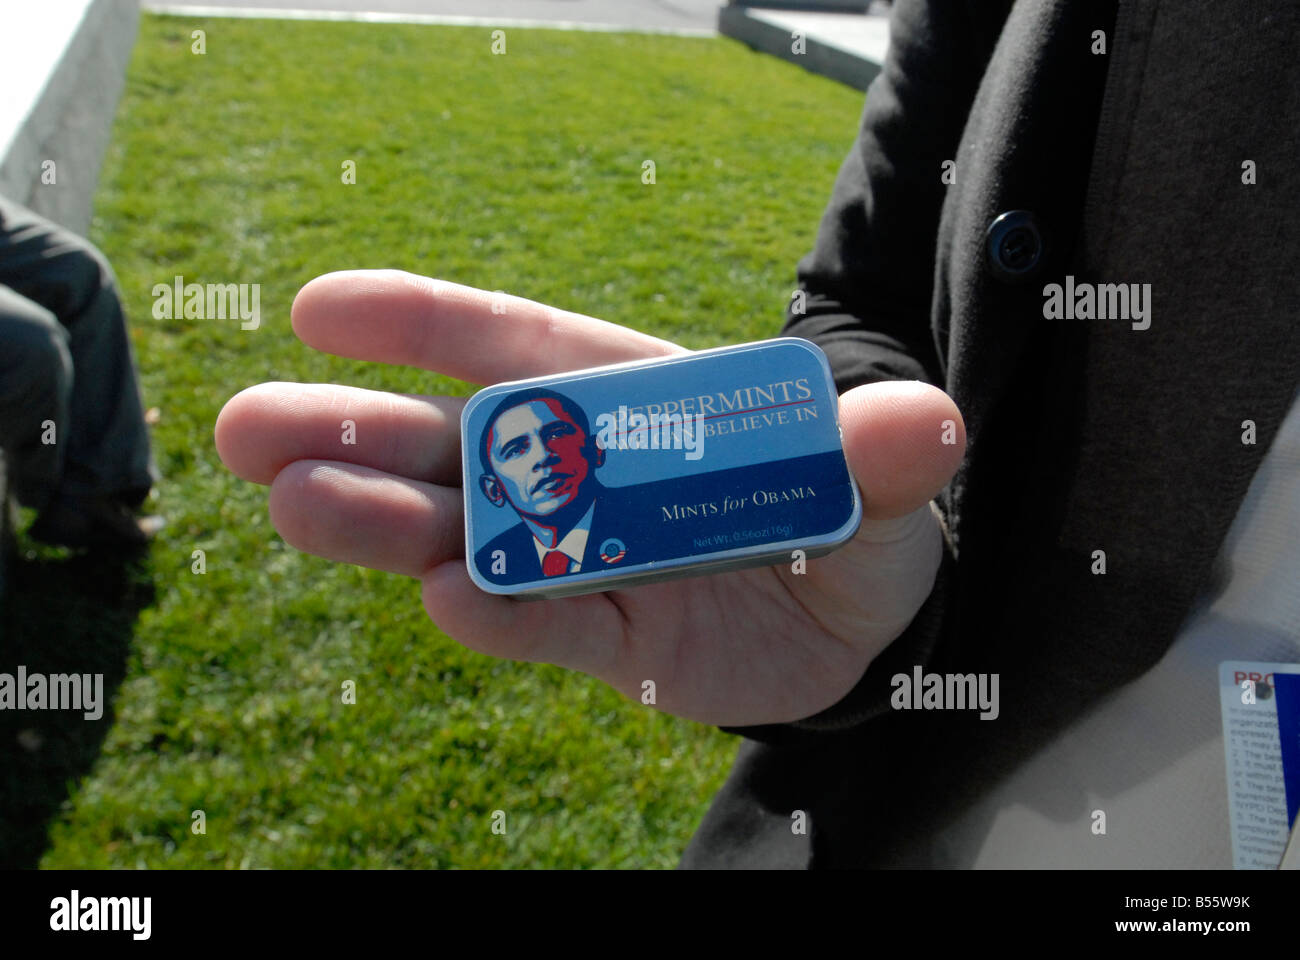 Barack Obama Peppermints We Can Believe In are seen on Thursday October 23 2008 Richard B Levine Stock Photo